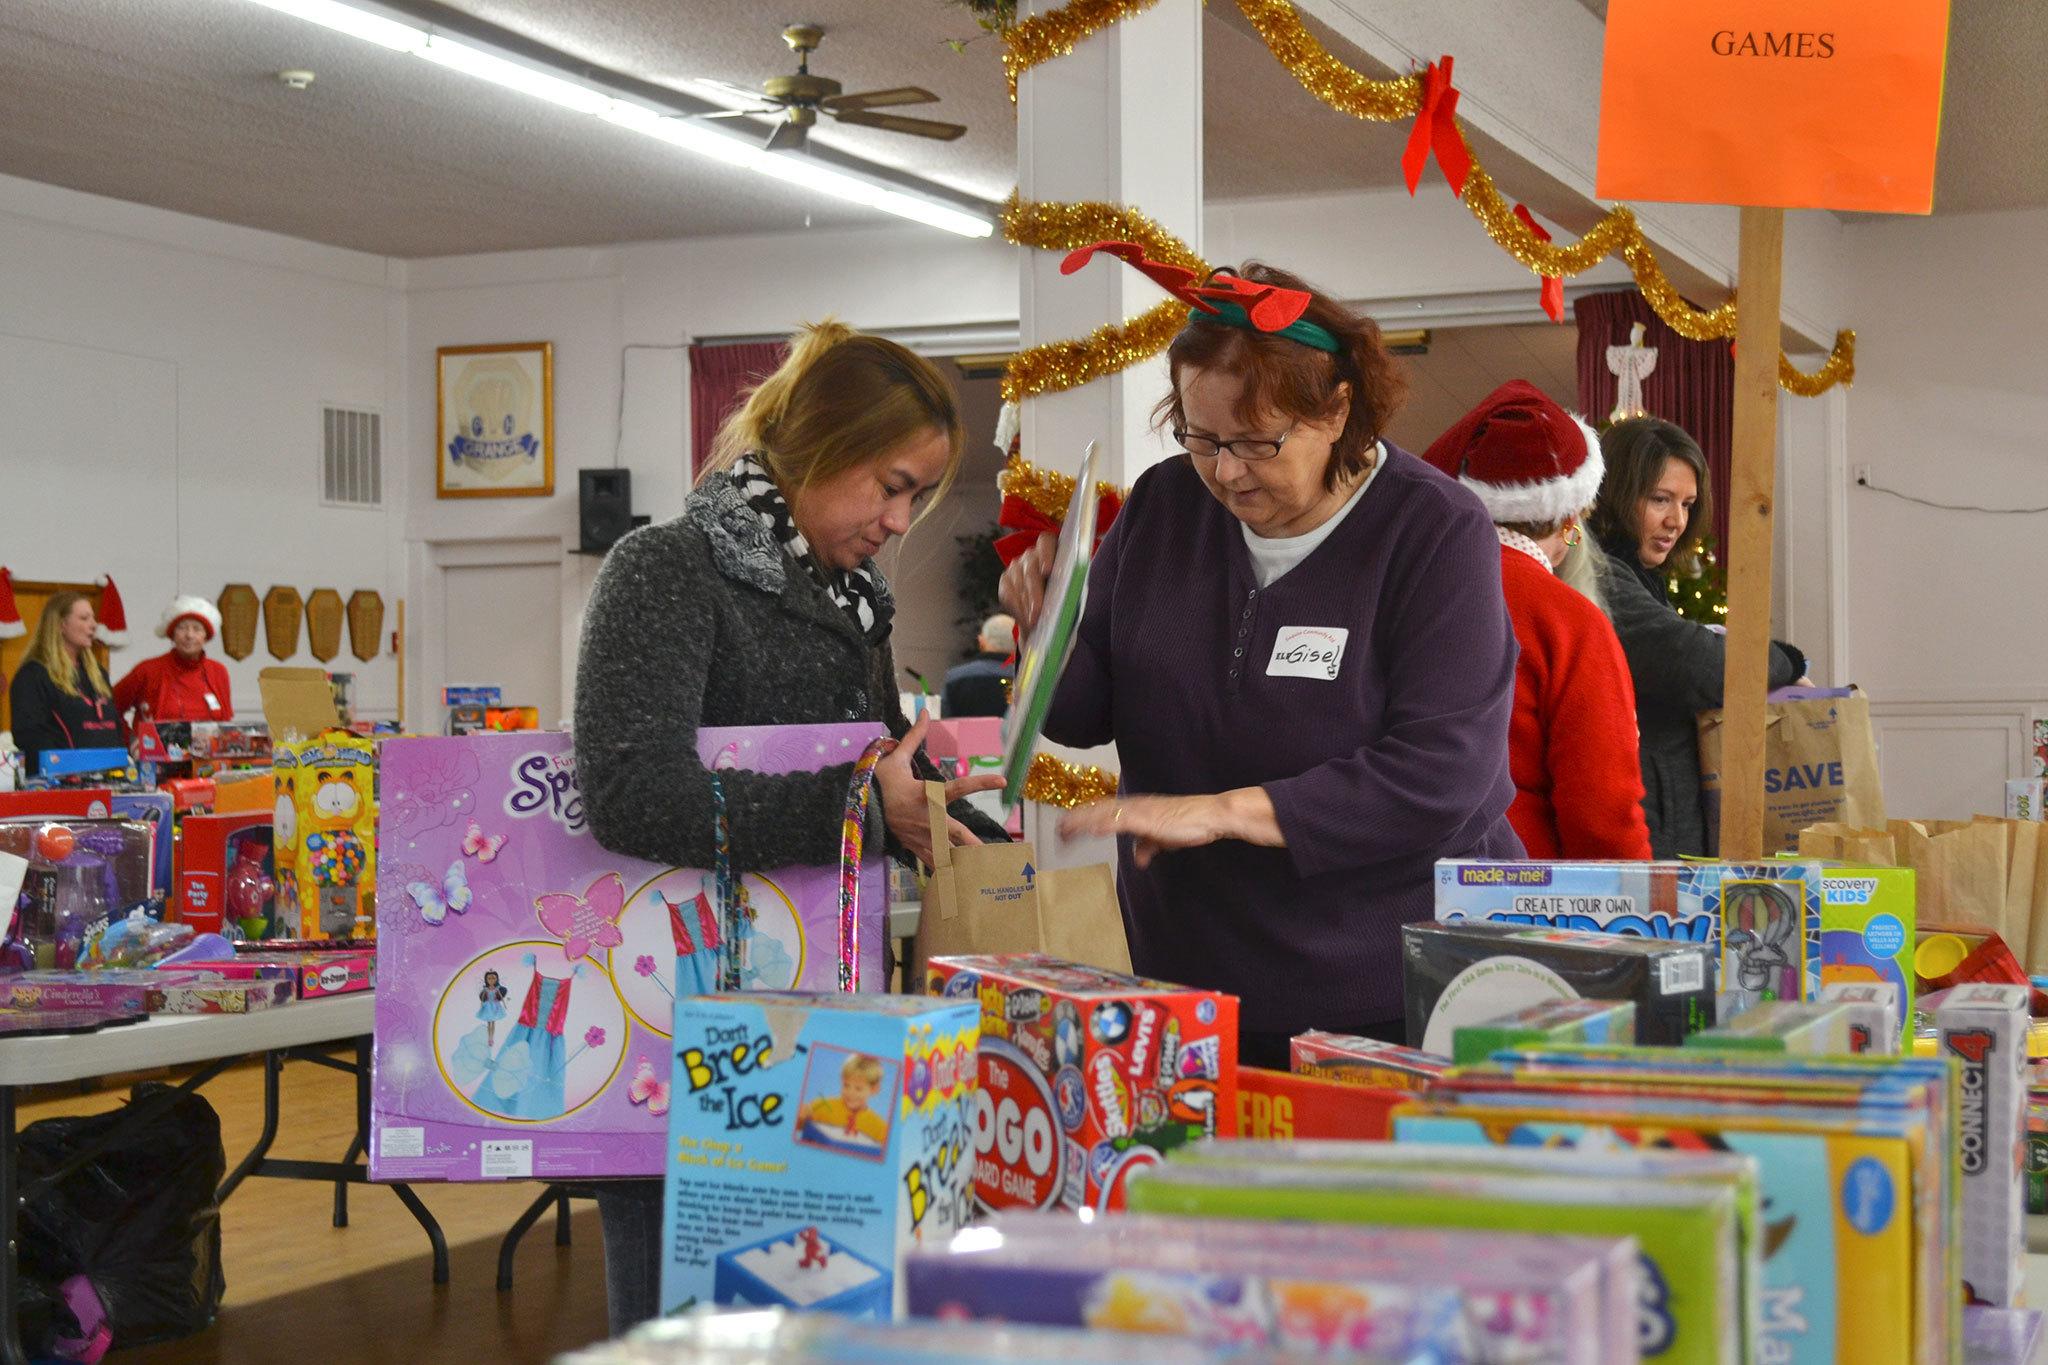 Farah Durham of Sequim looks for toys for her 4-year-old daughter with help from volunteer Gisele Gala at Toys for Sequim Kids on Dec. 14 in the Sequim Prairie Grange. “It’s a blessing to help others because God has blessed us so abundantly,” Gala said. (Matthew Nash/Olympic Peninsula News Group)